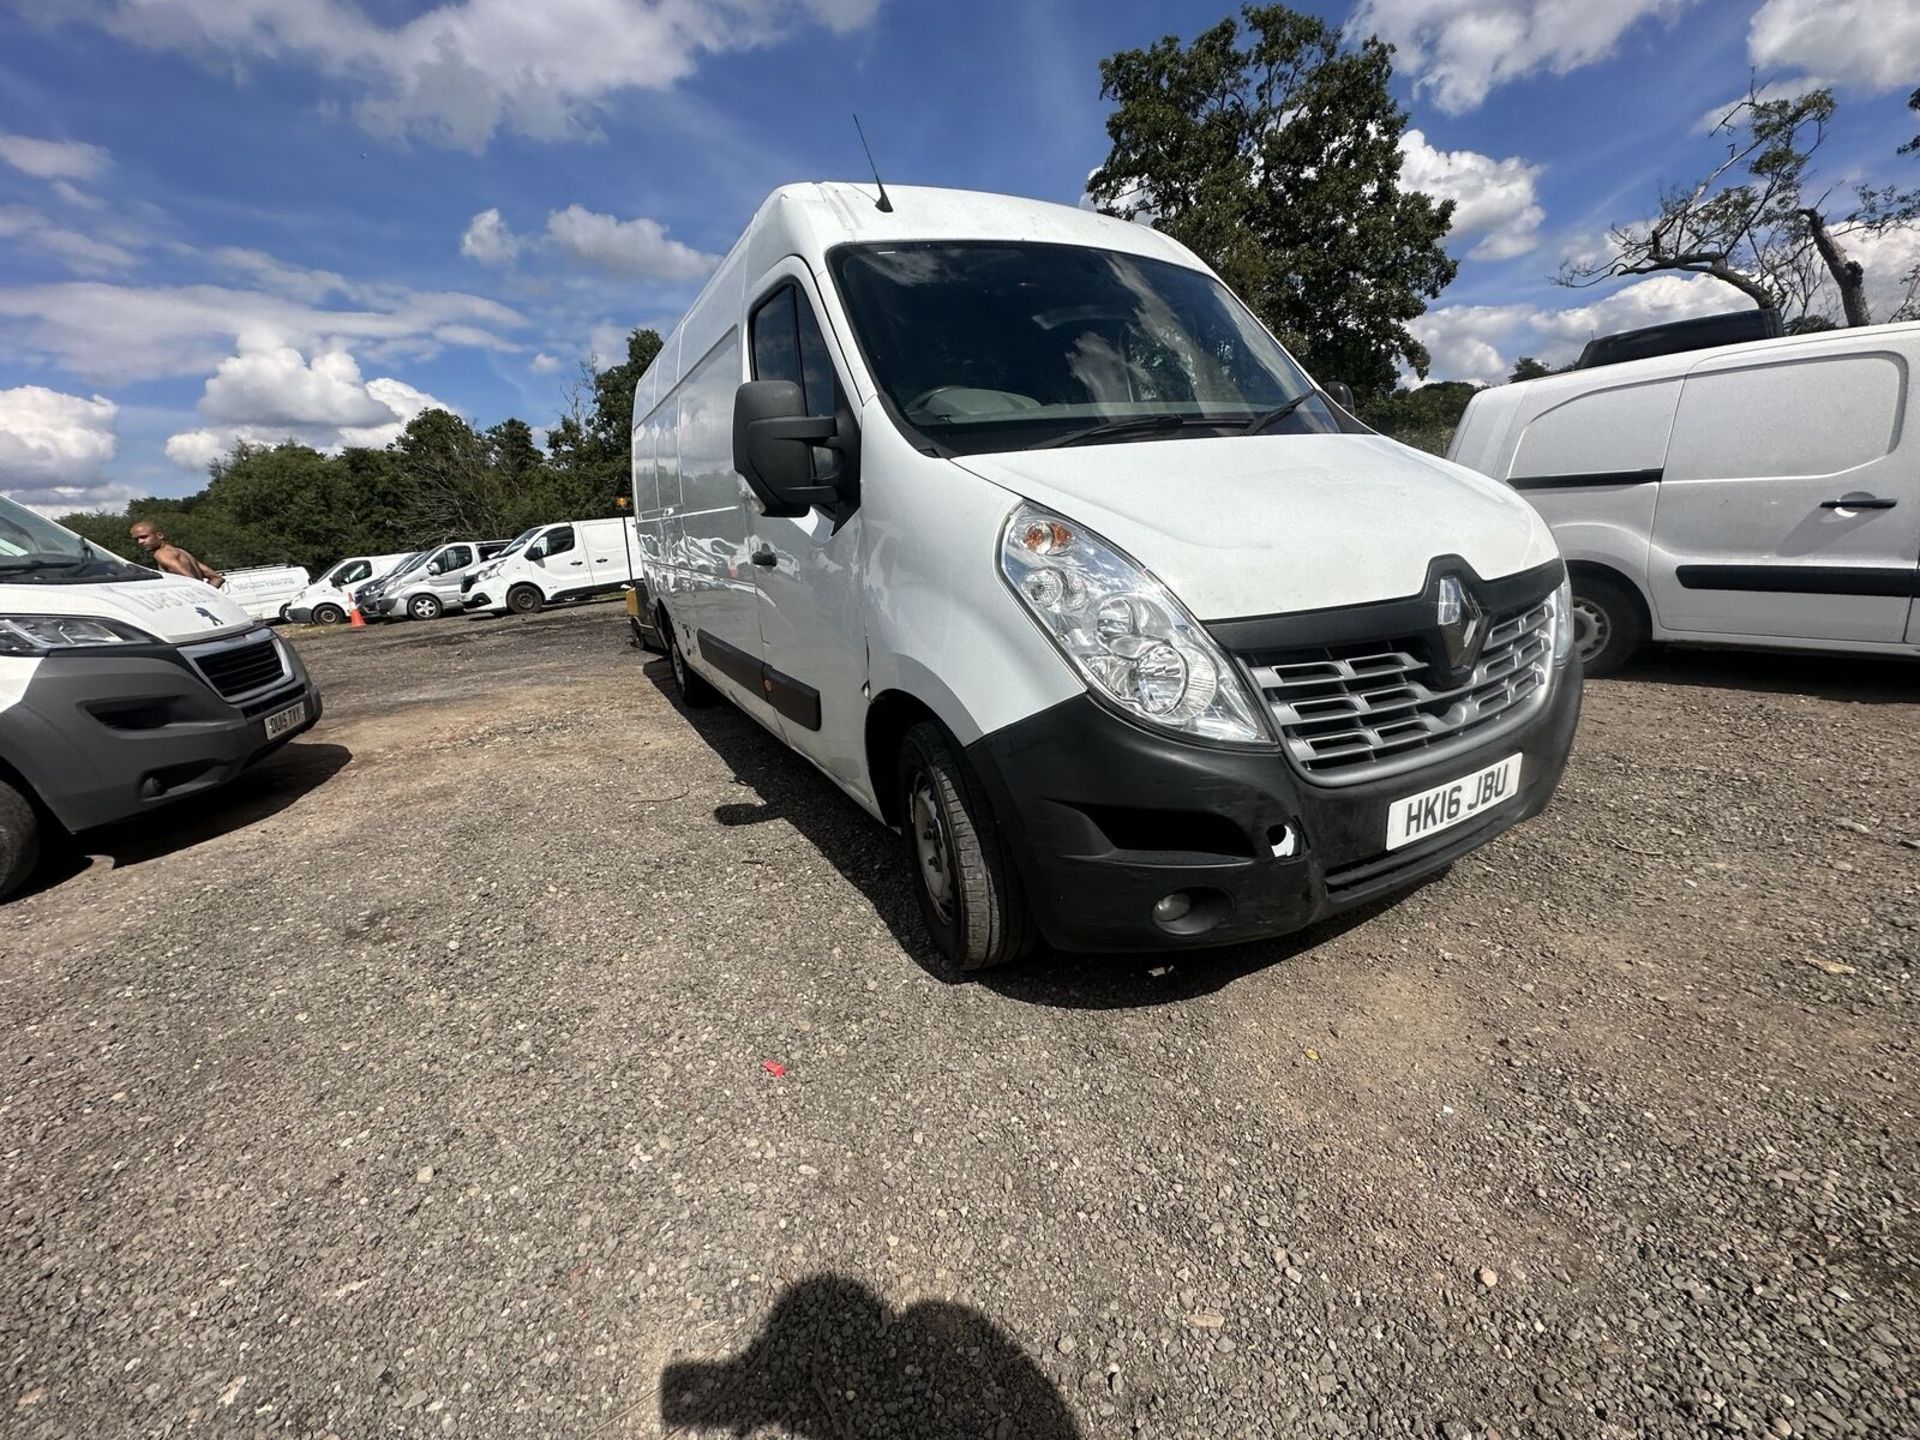 PRICED TO CLEAR - 2016 RENAULT MASTER LWB - (NO VAT ON HAMMER)